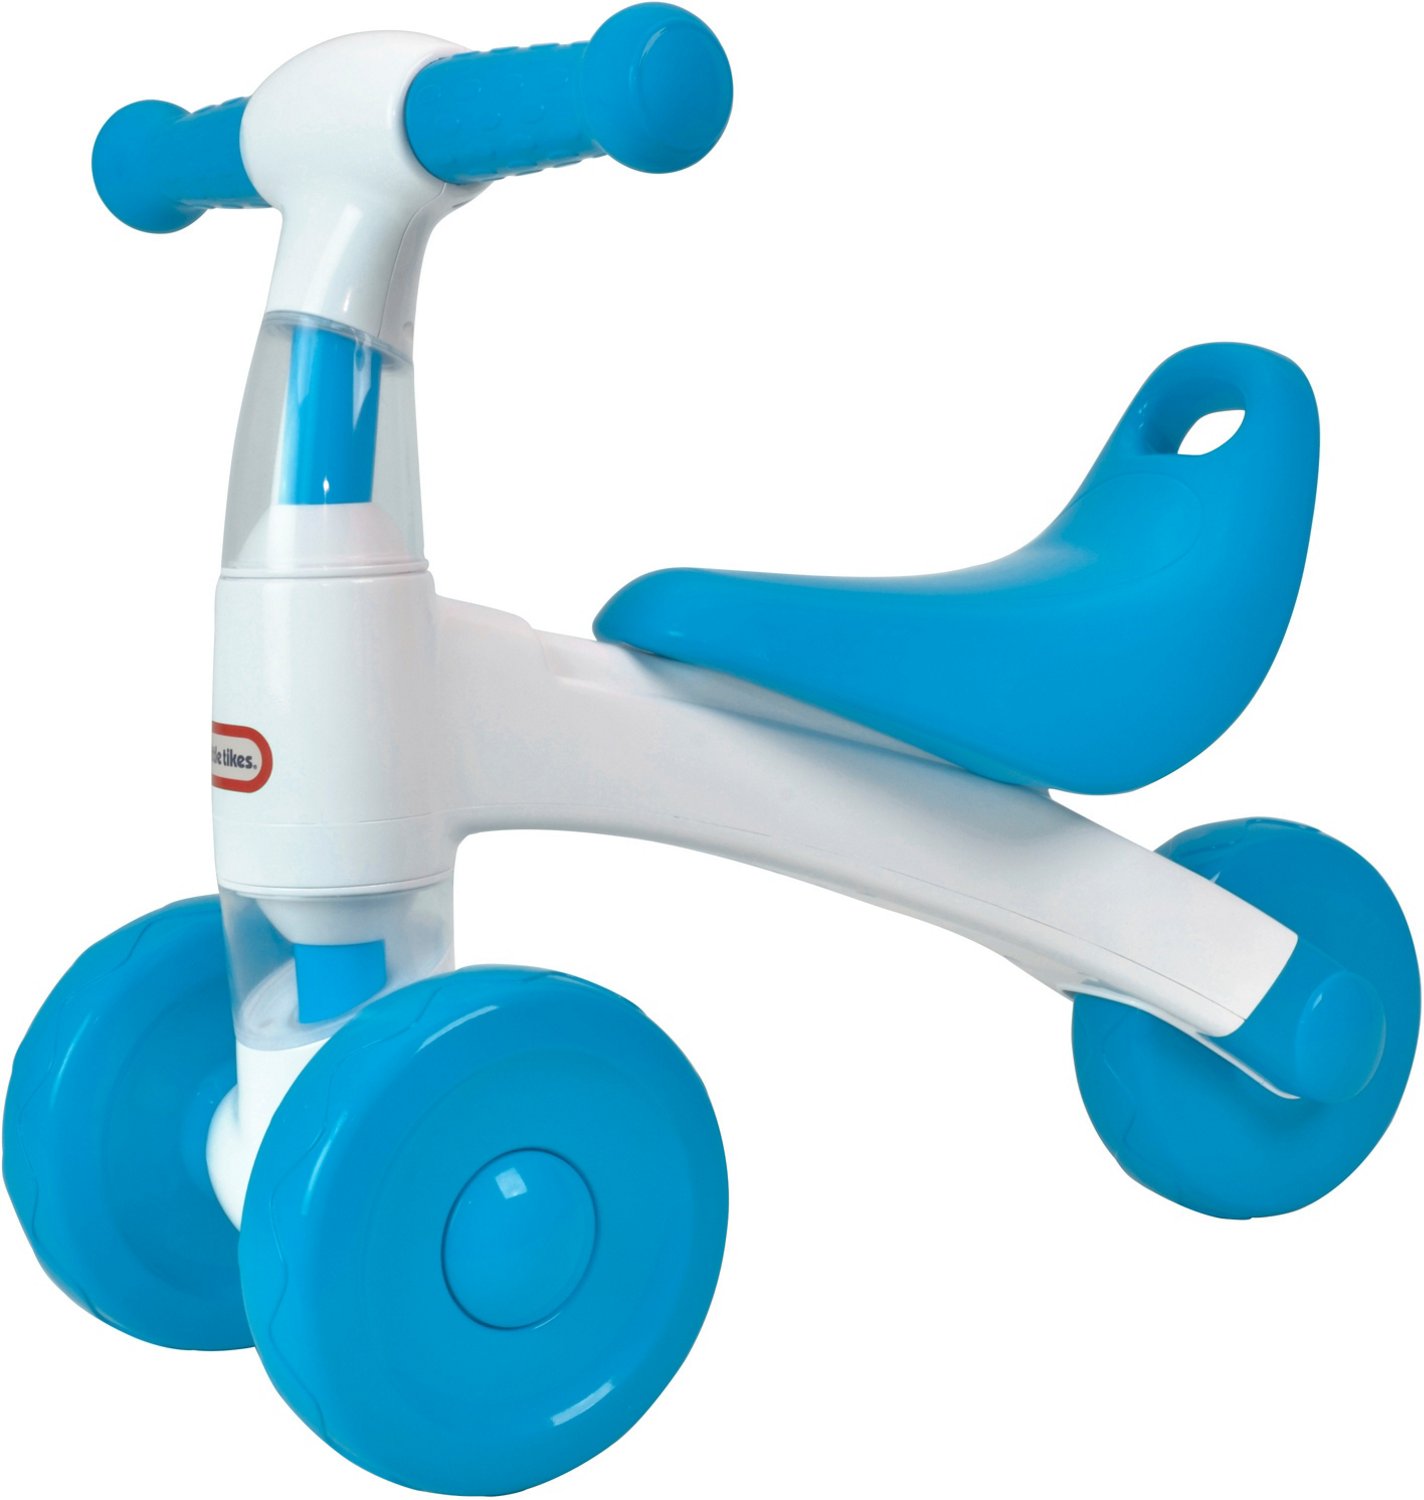 academy tricycle for adults